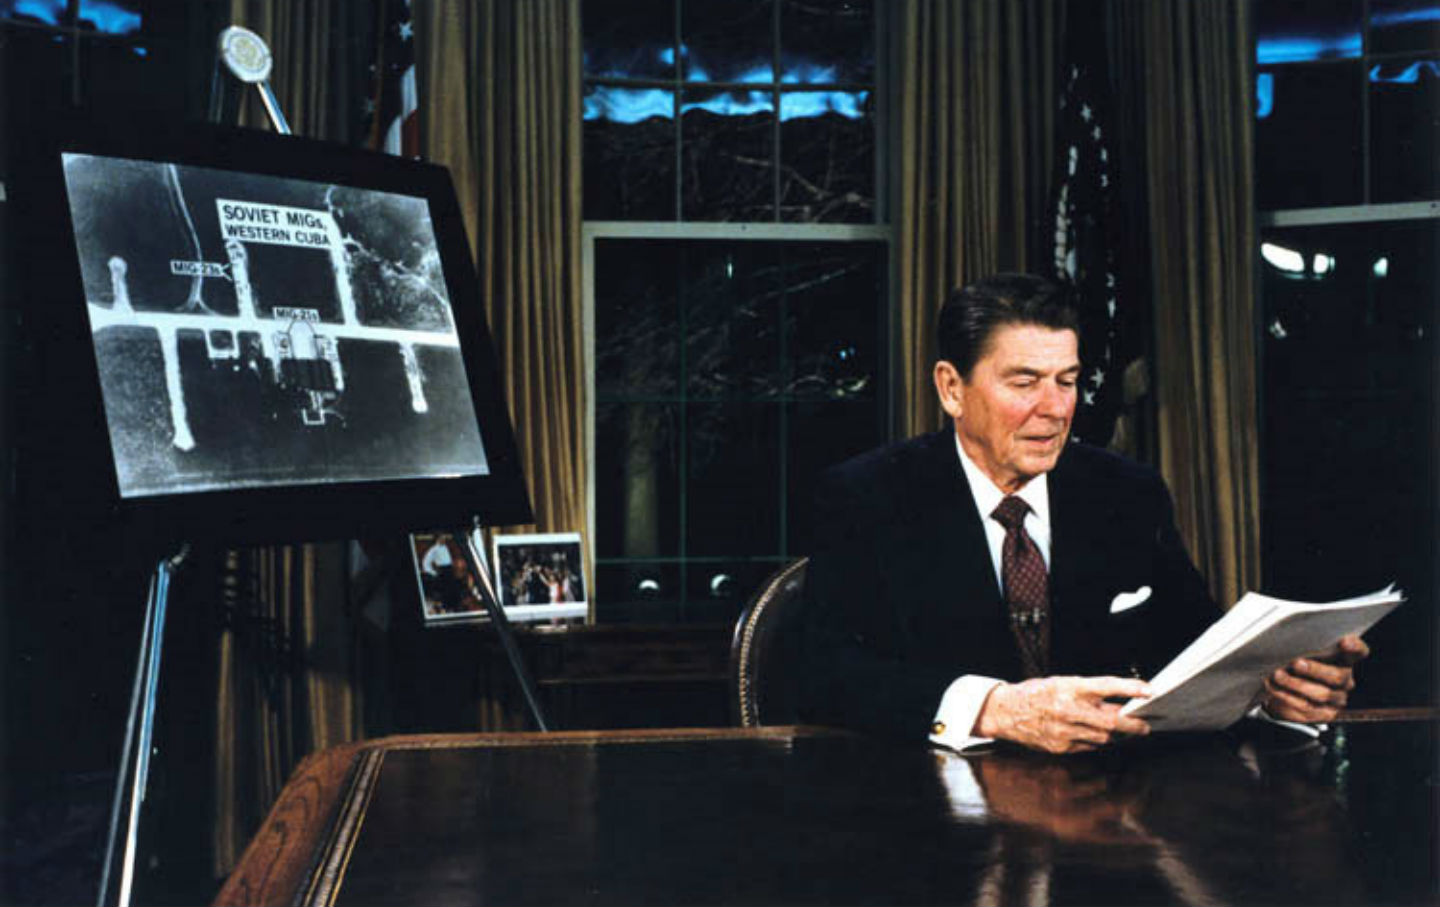 March 23, 1983: Reagan Proposes the ‘Star Wars’ Initiative